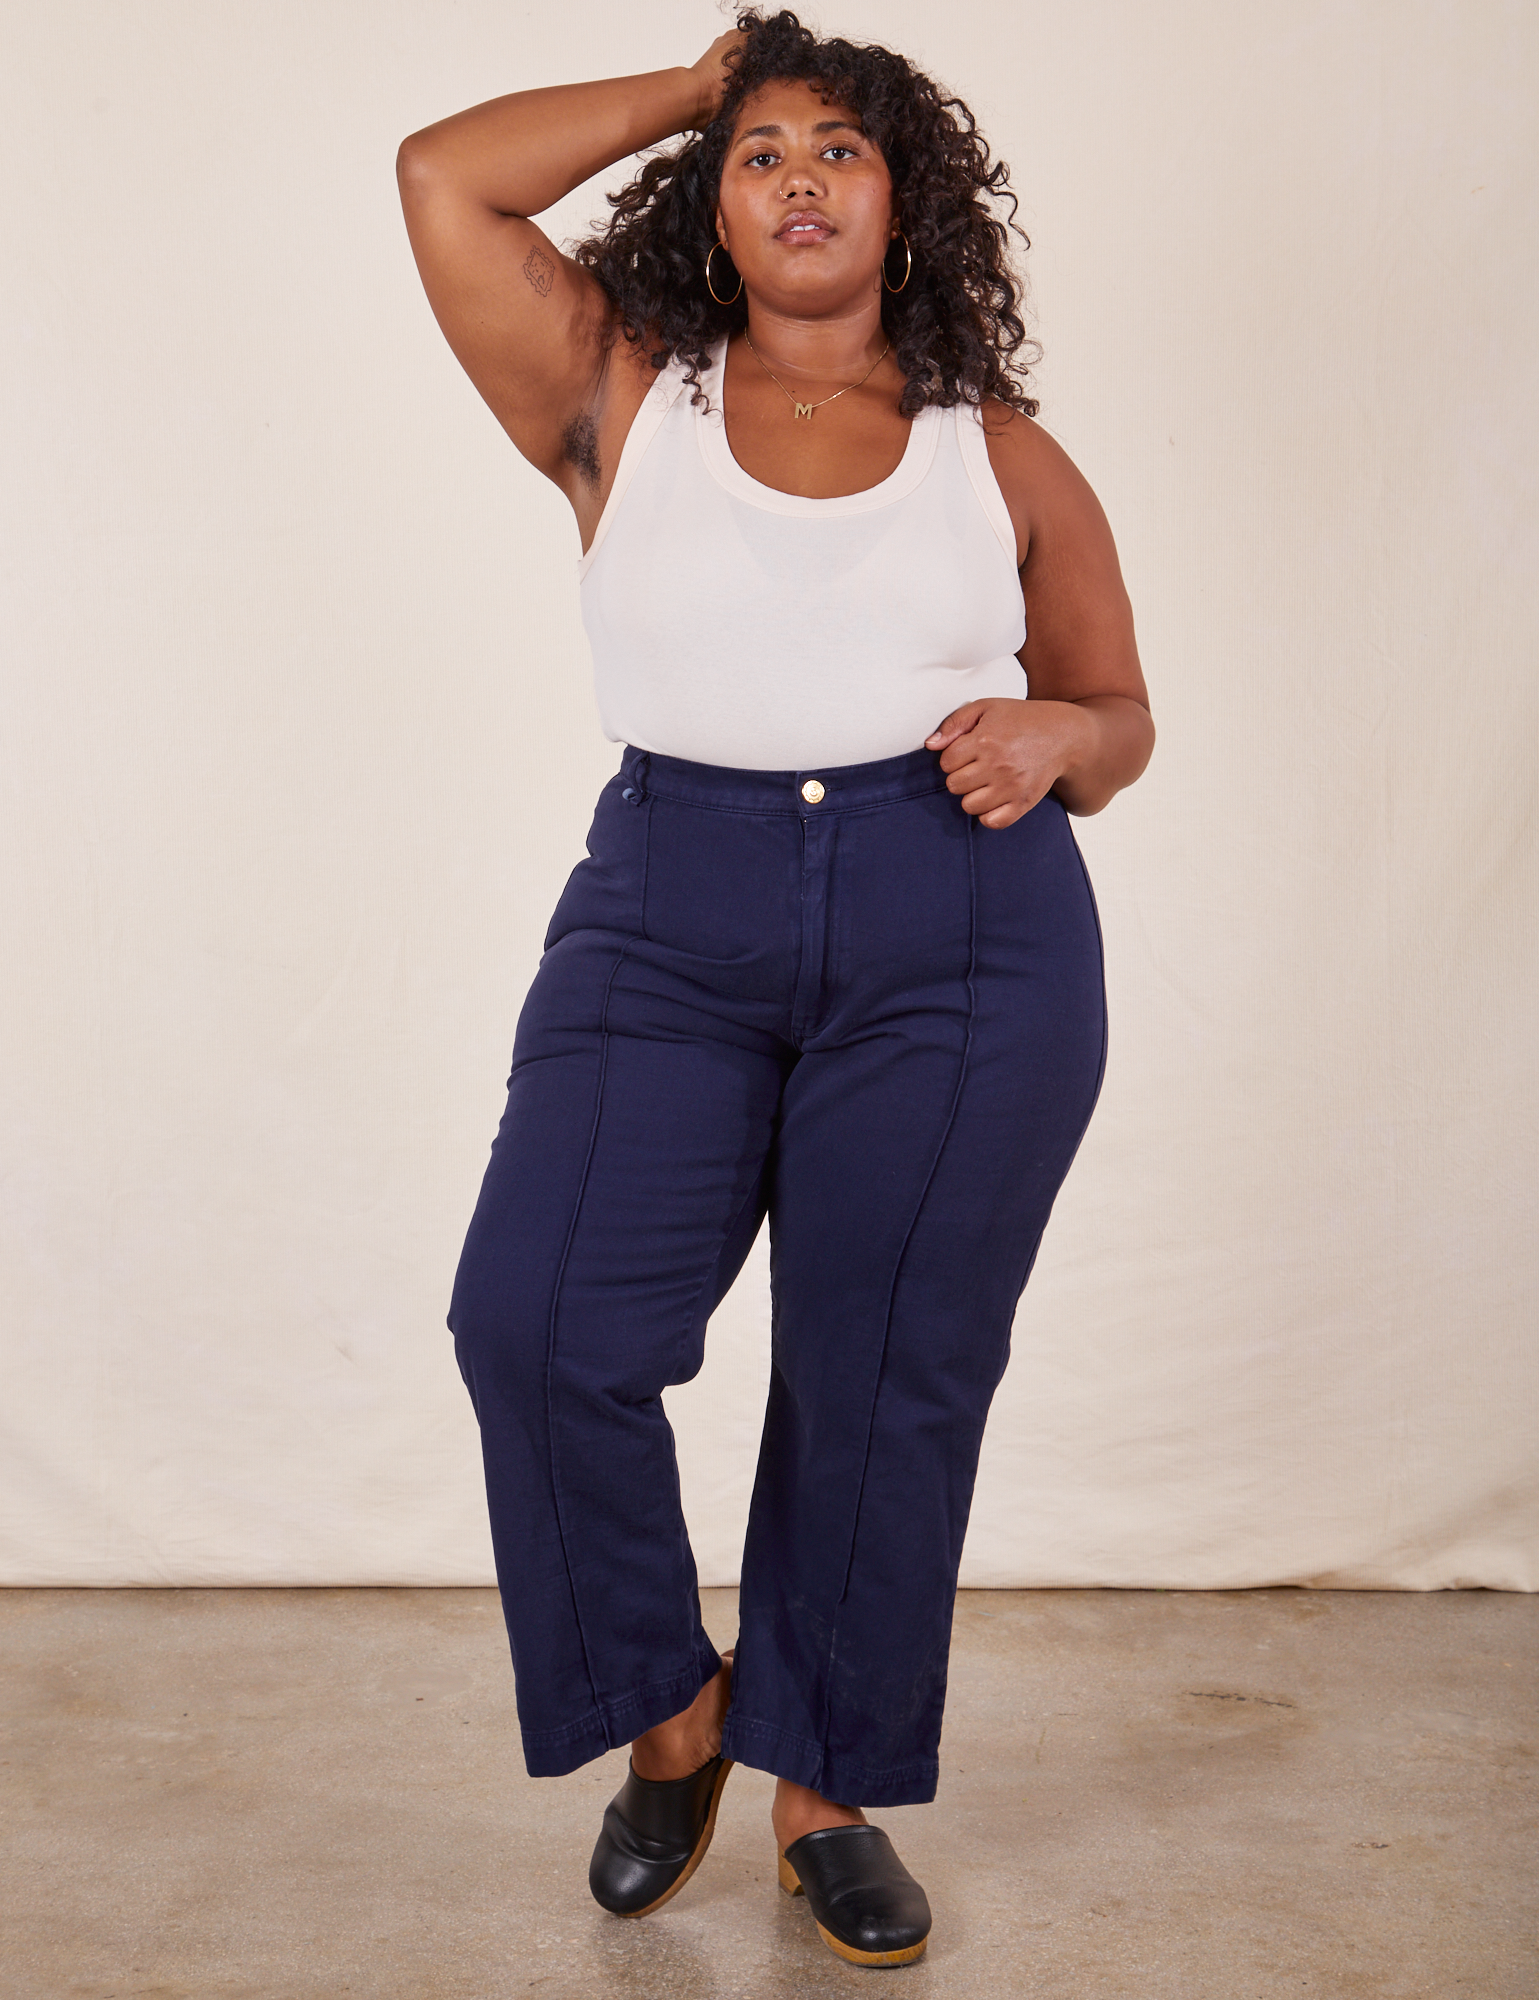 Morgan is 5&#39;5&quot; and wearing 1XL Western Pants in Navy Blue paired with vintage off-white Tank Top